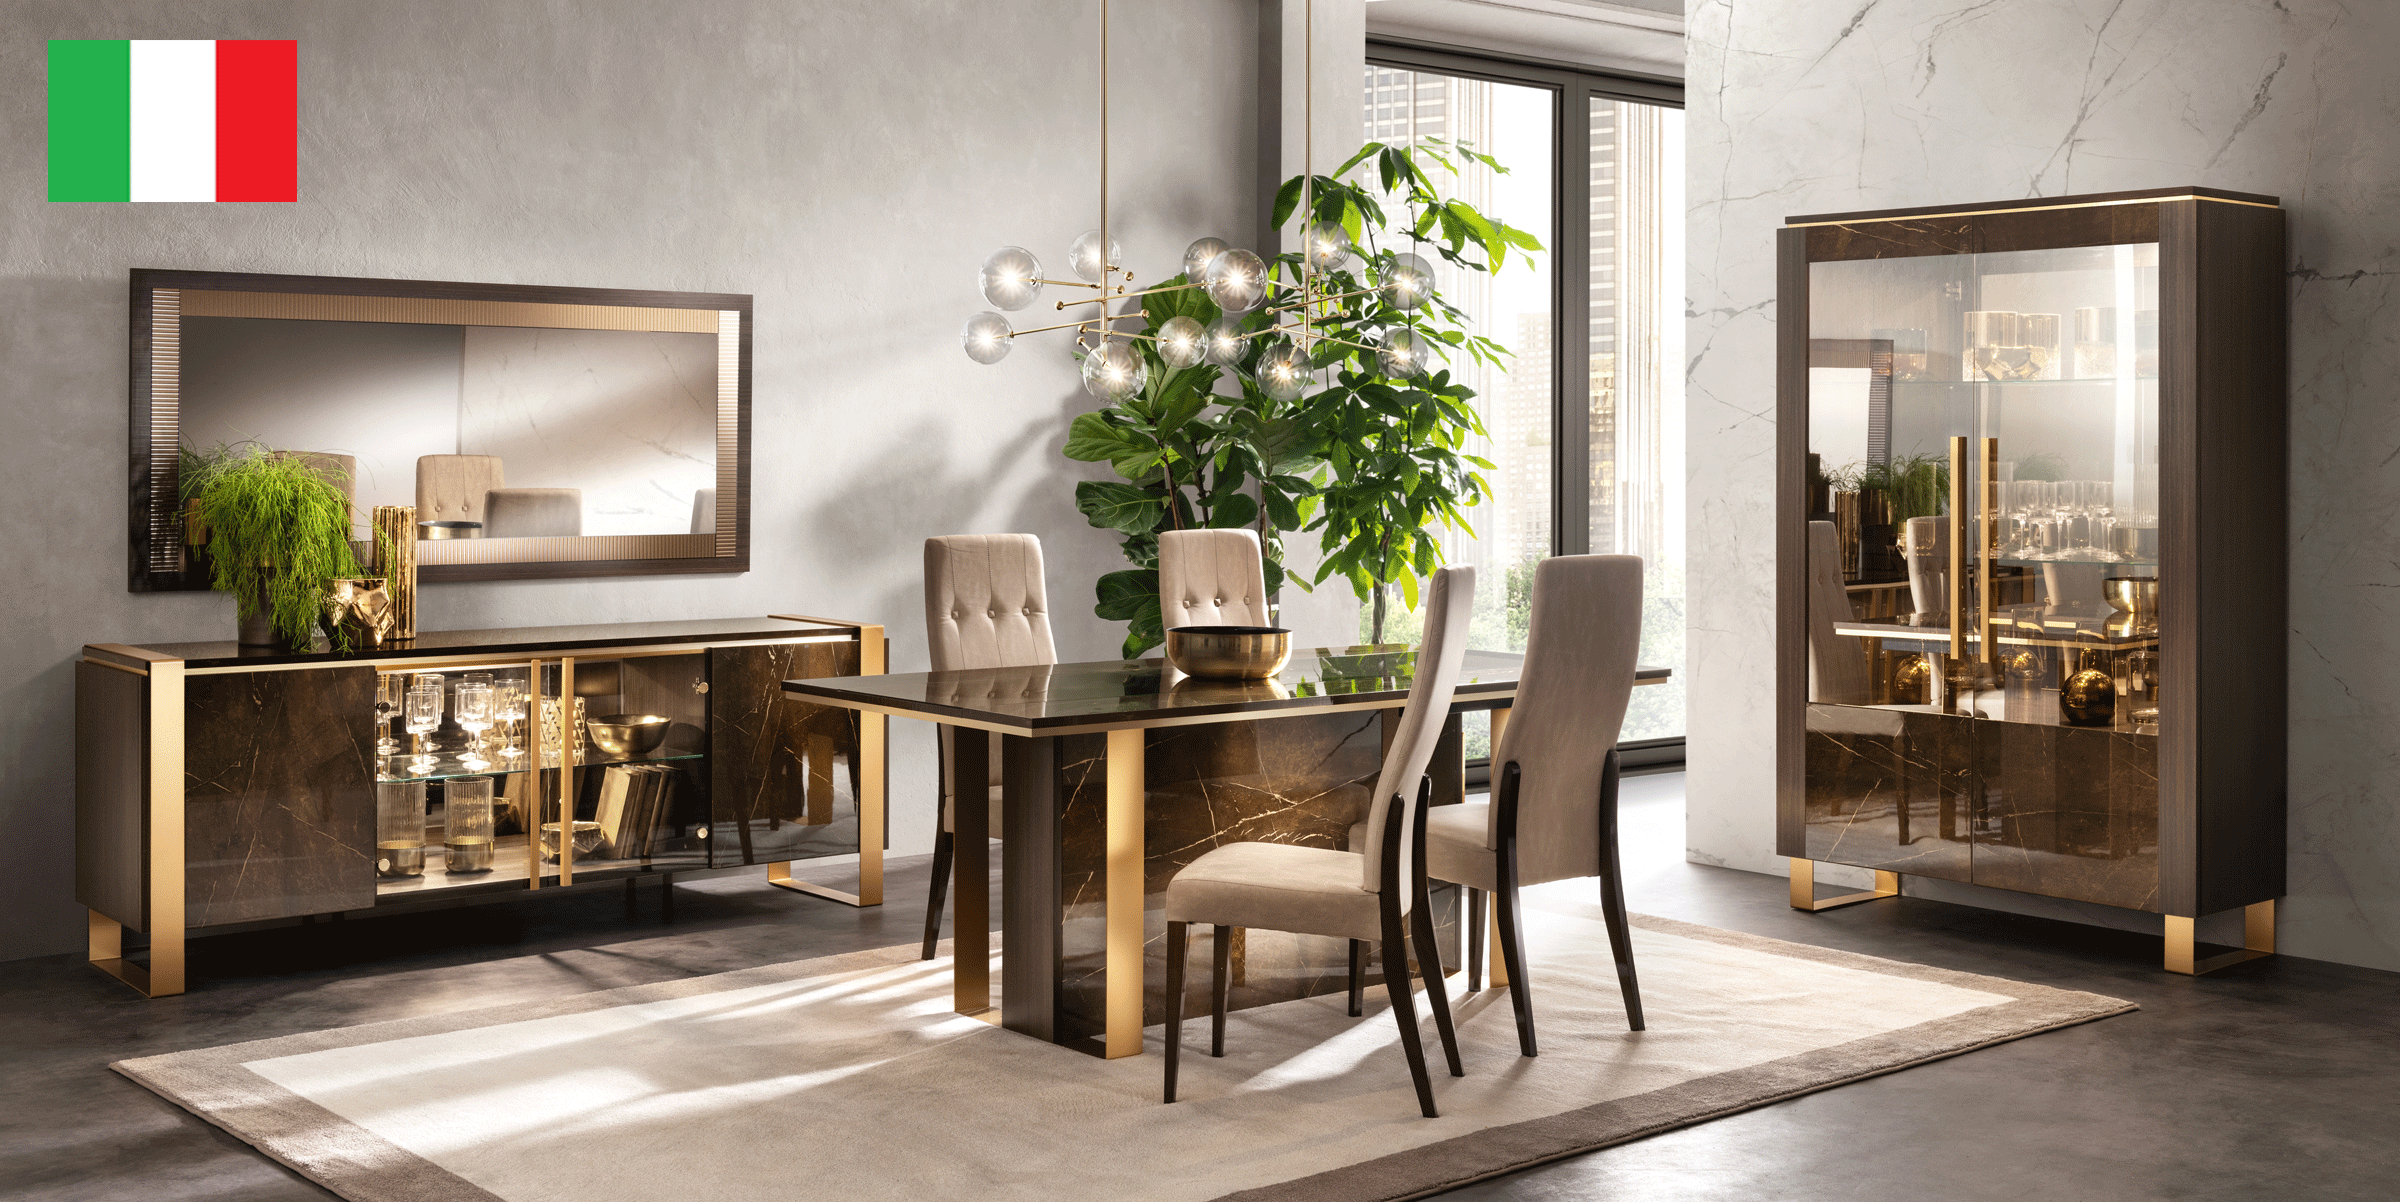 Dining Room Furniture Tables Essenza Dining by Arredoclassic, Italy